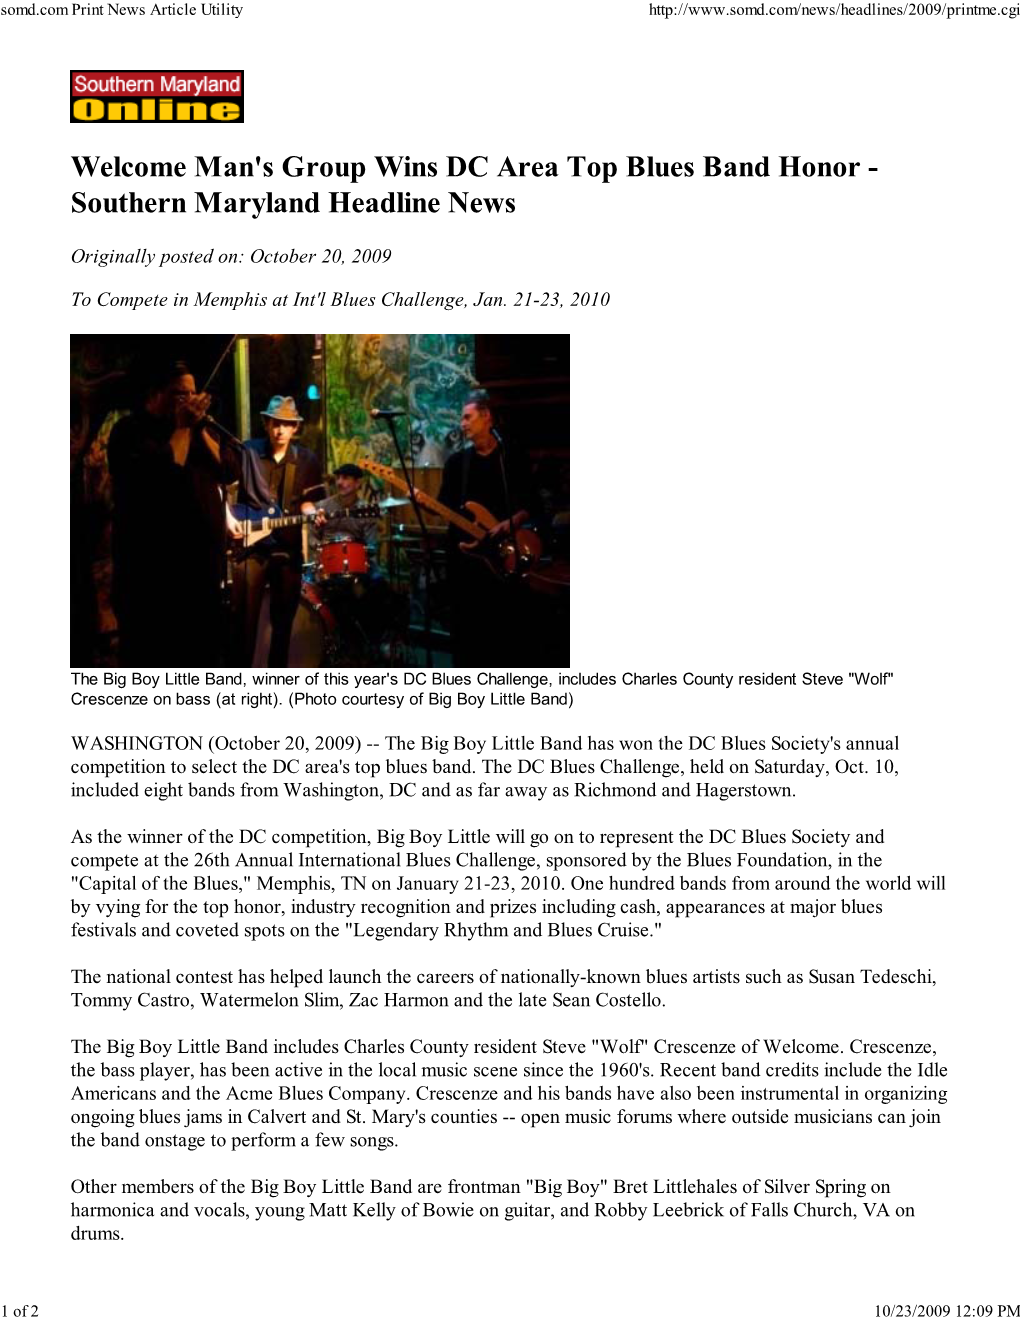 SOMD News Article About Big Boy Little Band Winning Top DC Blues